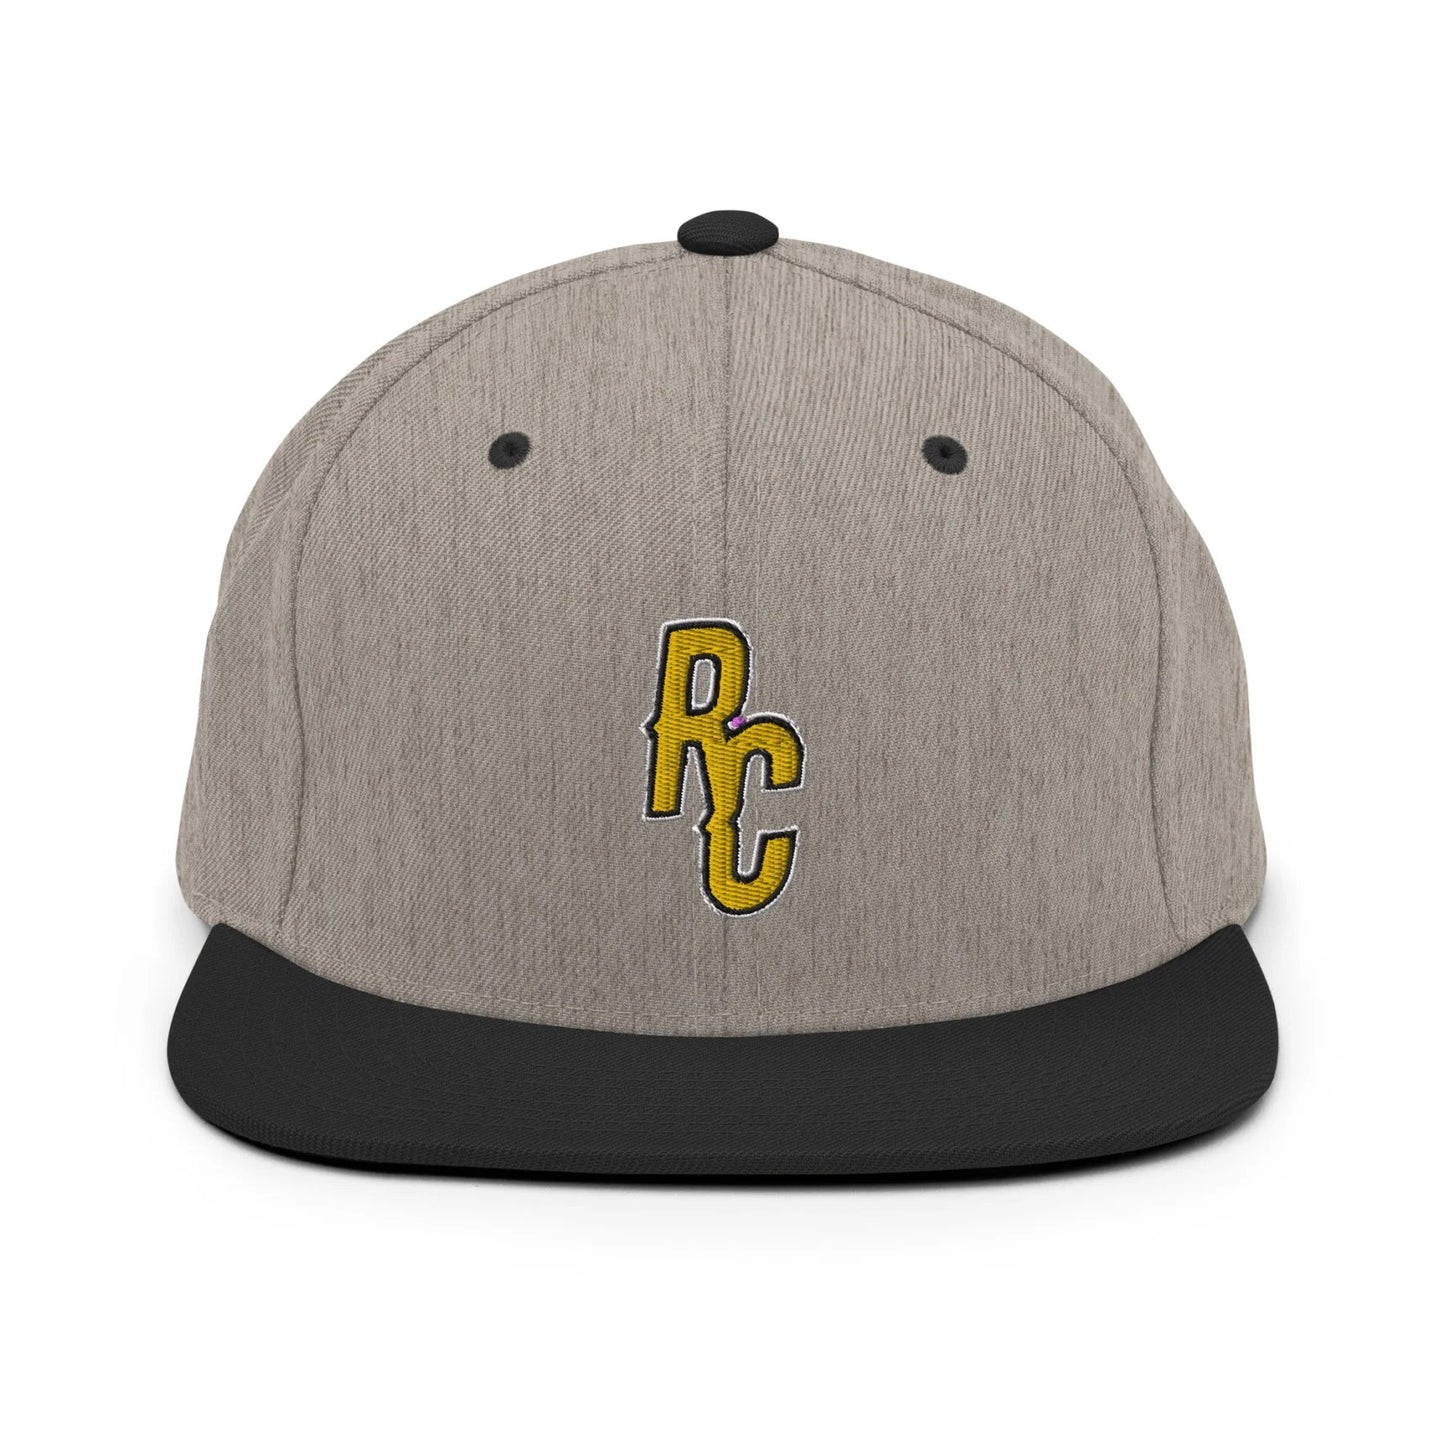 Ray Cheesy ShowZone snapback hat in heather grey with black brim and accents